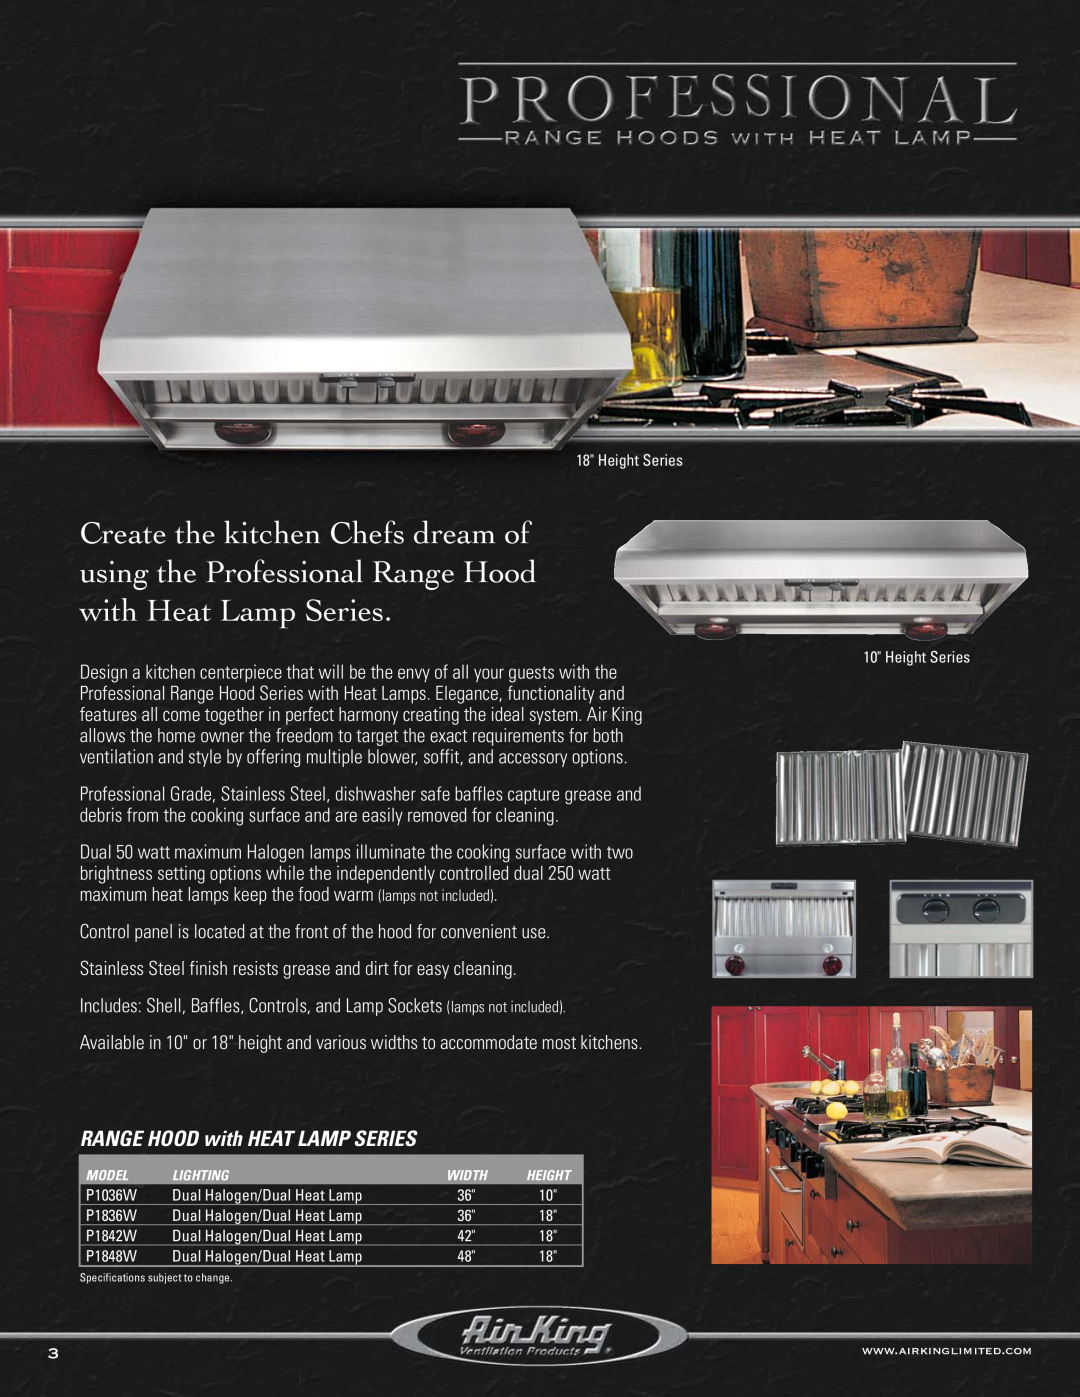 Air King P1036 RANGE HOOD with HEAT LAMP SERIES, Control panel is located at the front of the hood for convenient use 